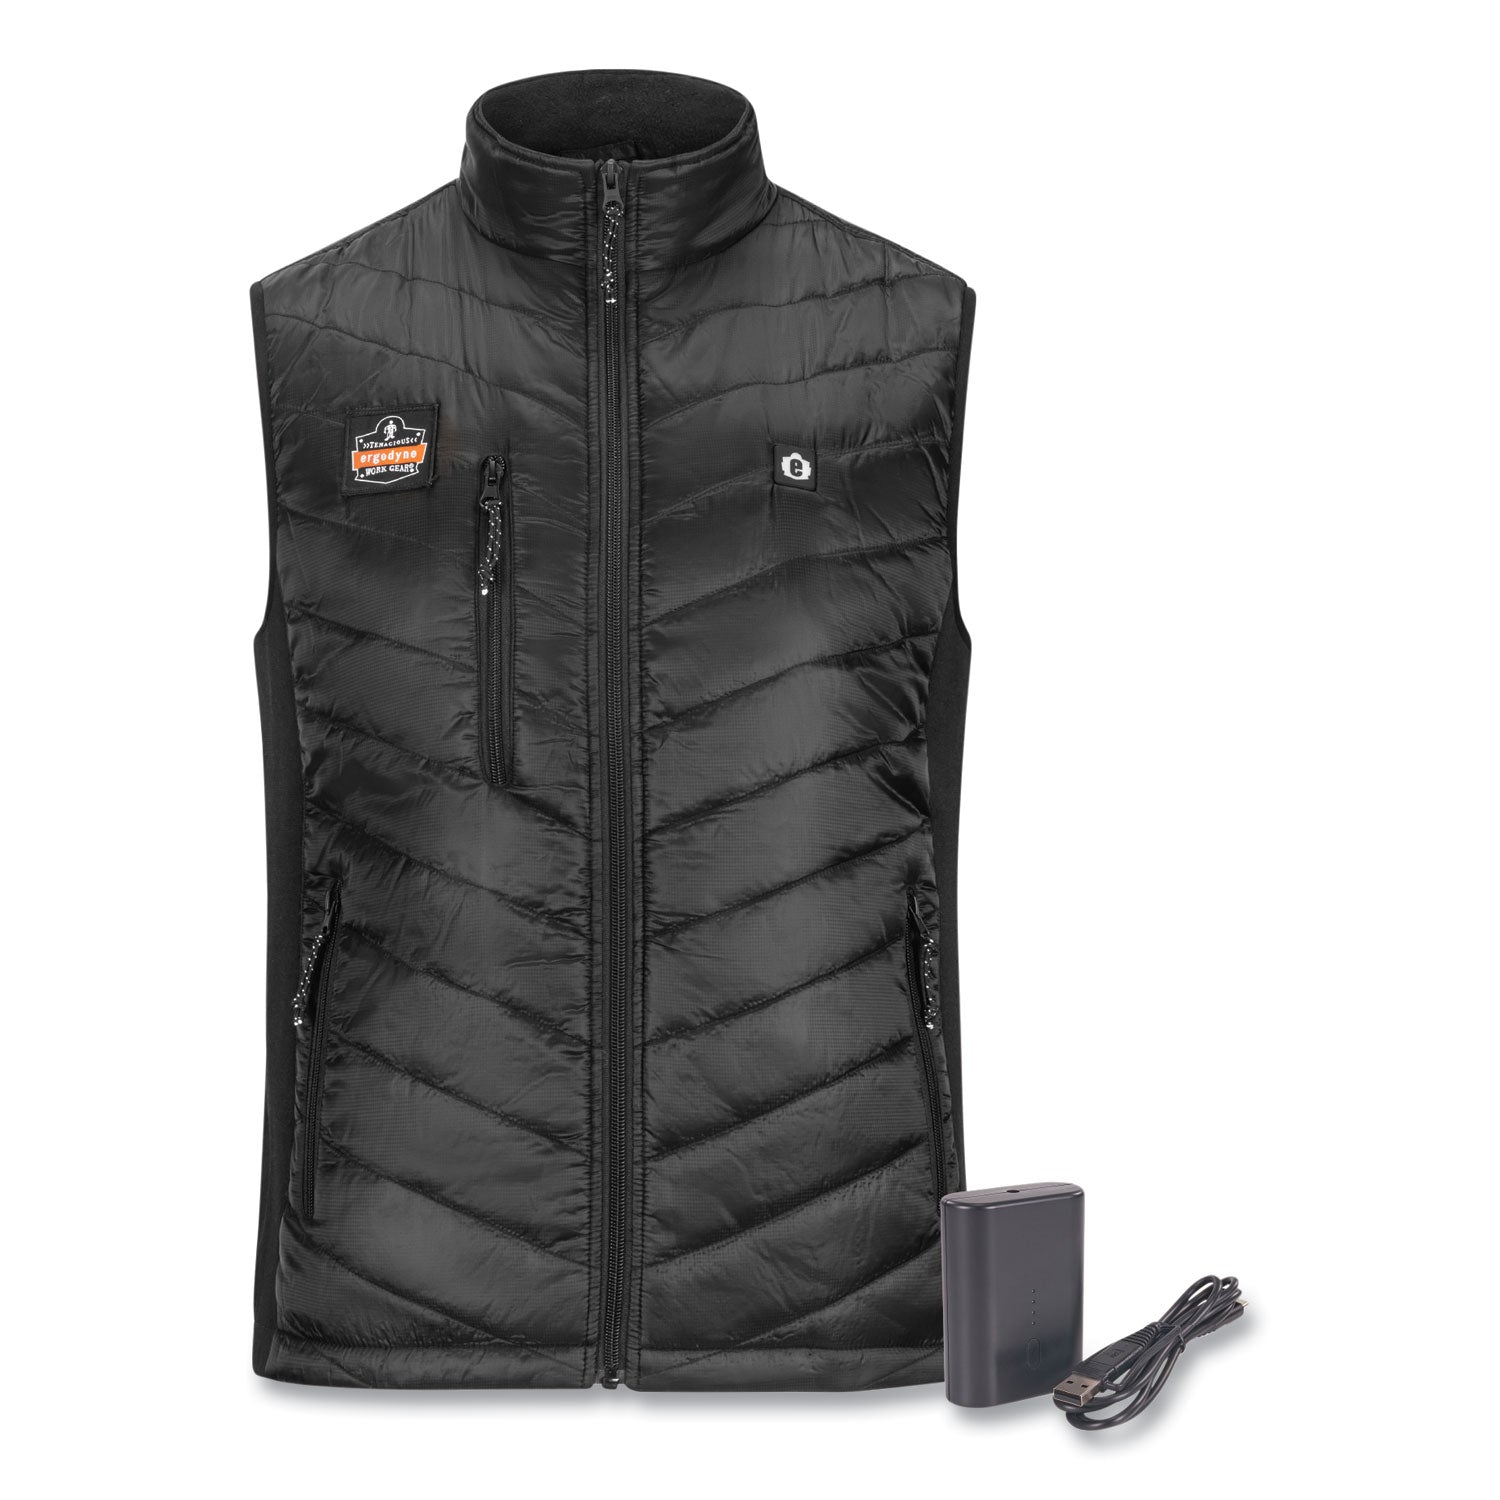 n-ferno-6495-rechargeable-heated-vest-with-battery-power-bank-fleece-polyester-4x-large-black-ships-in-1-3-business-days_ego41707 - 1